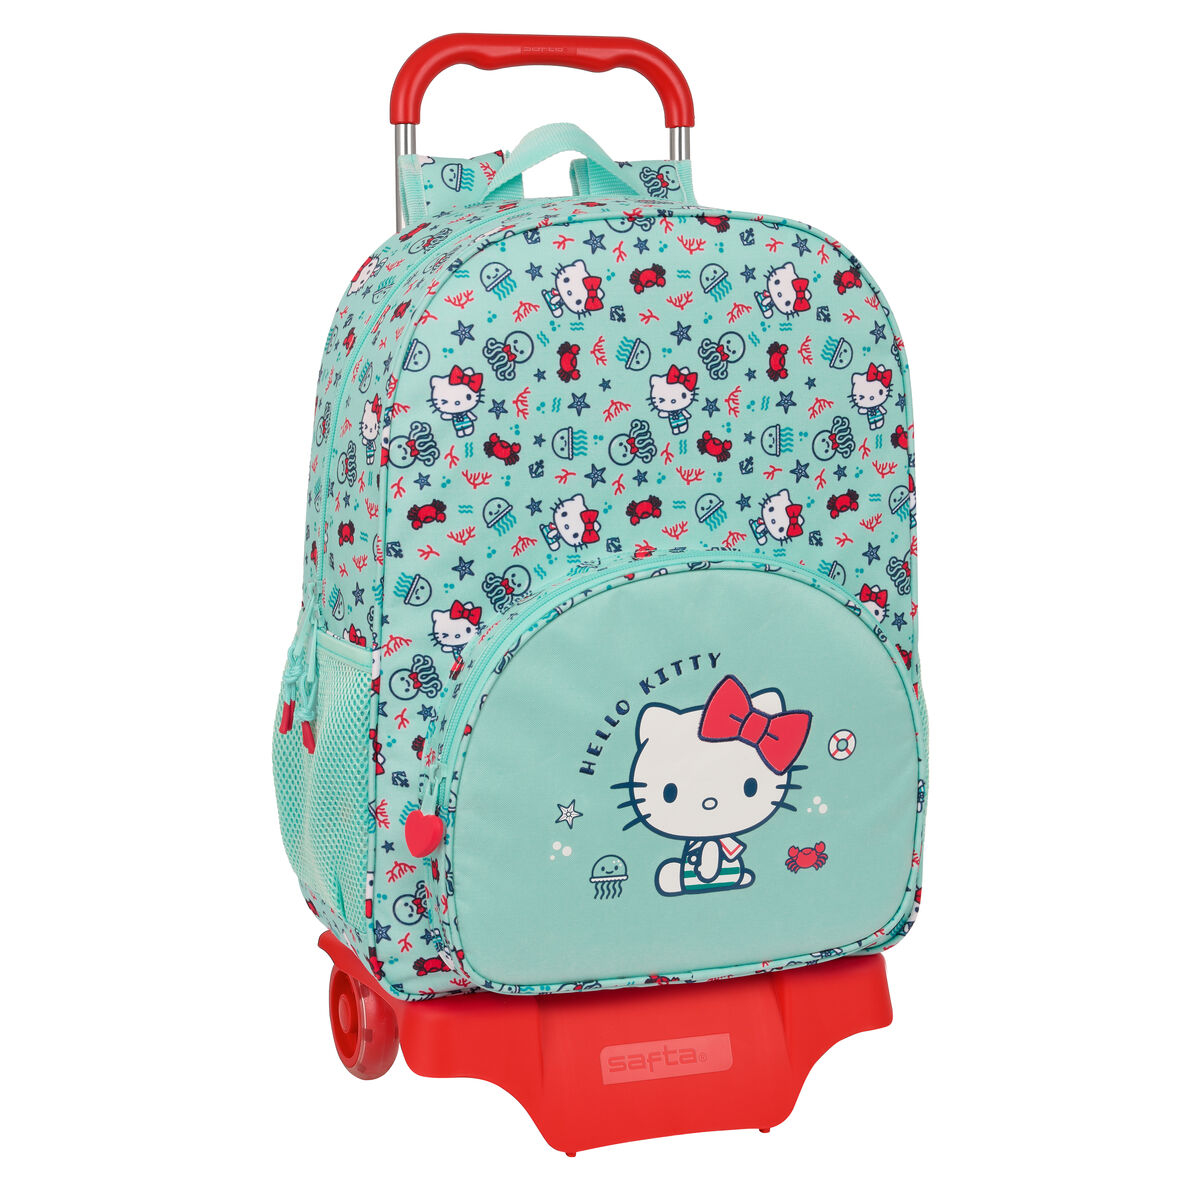 Cartable à roulettes Hello Kitty Sea lovers Turquoise 33 x 42 x 14 cm